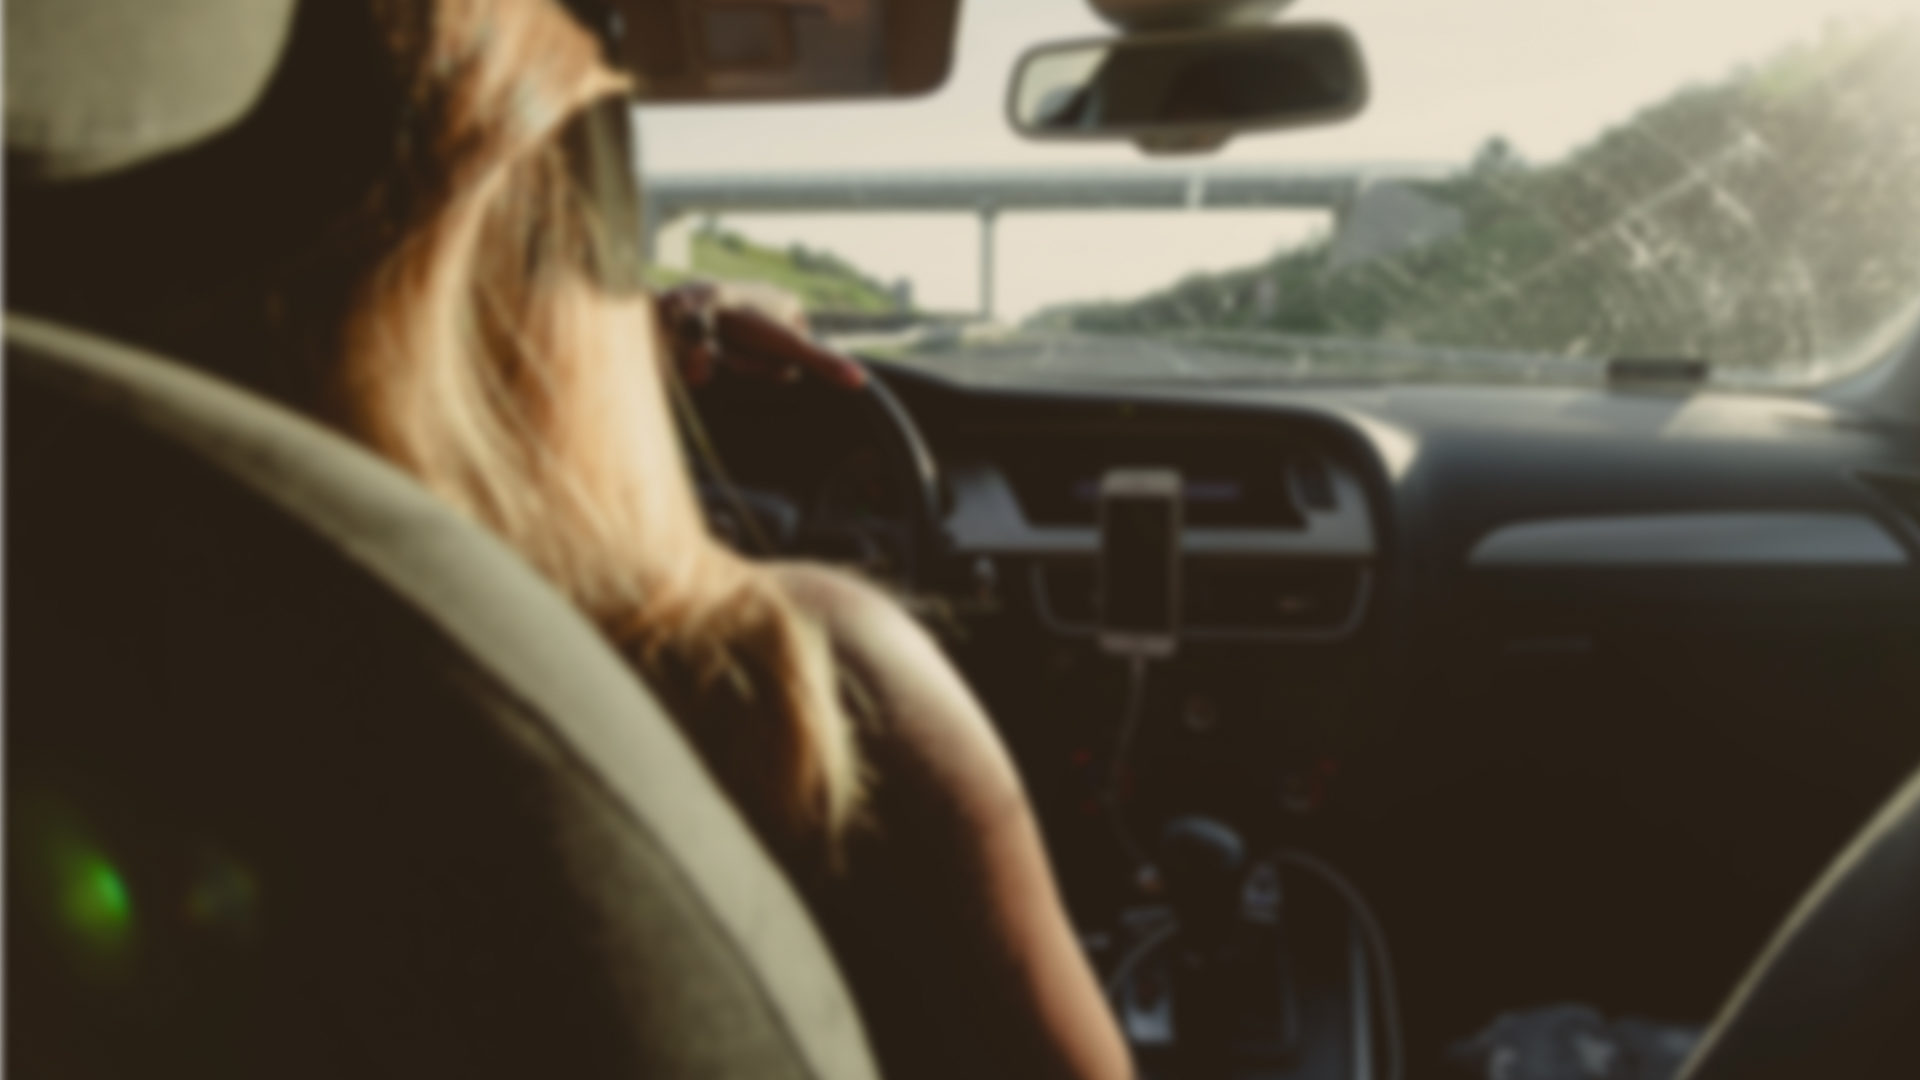 Unfocused photo of a woman driving a vehicle on a freeway